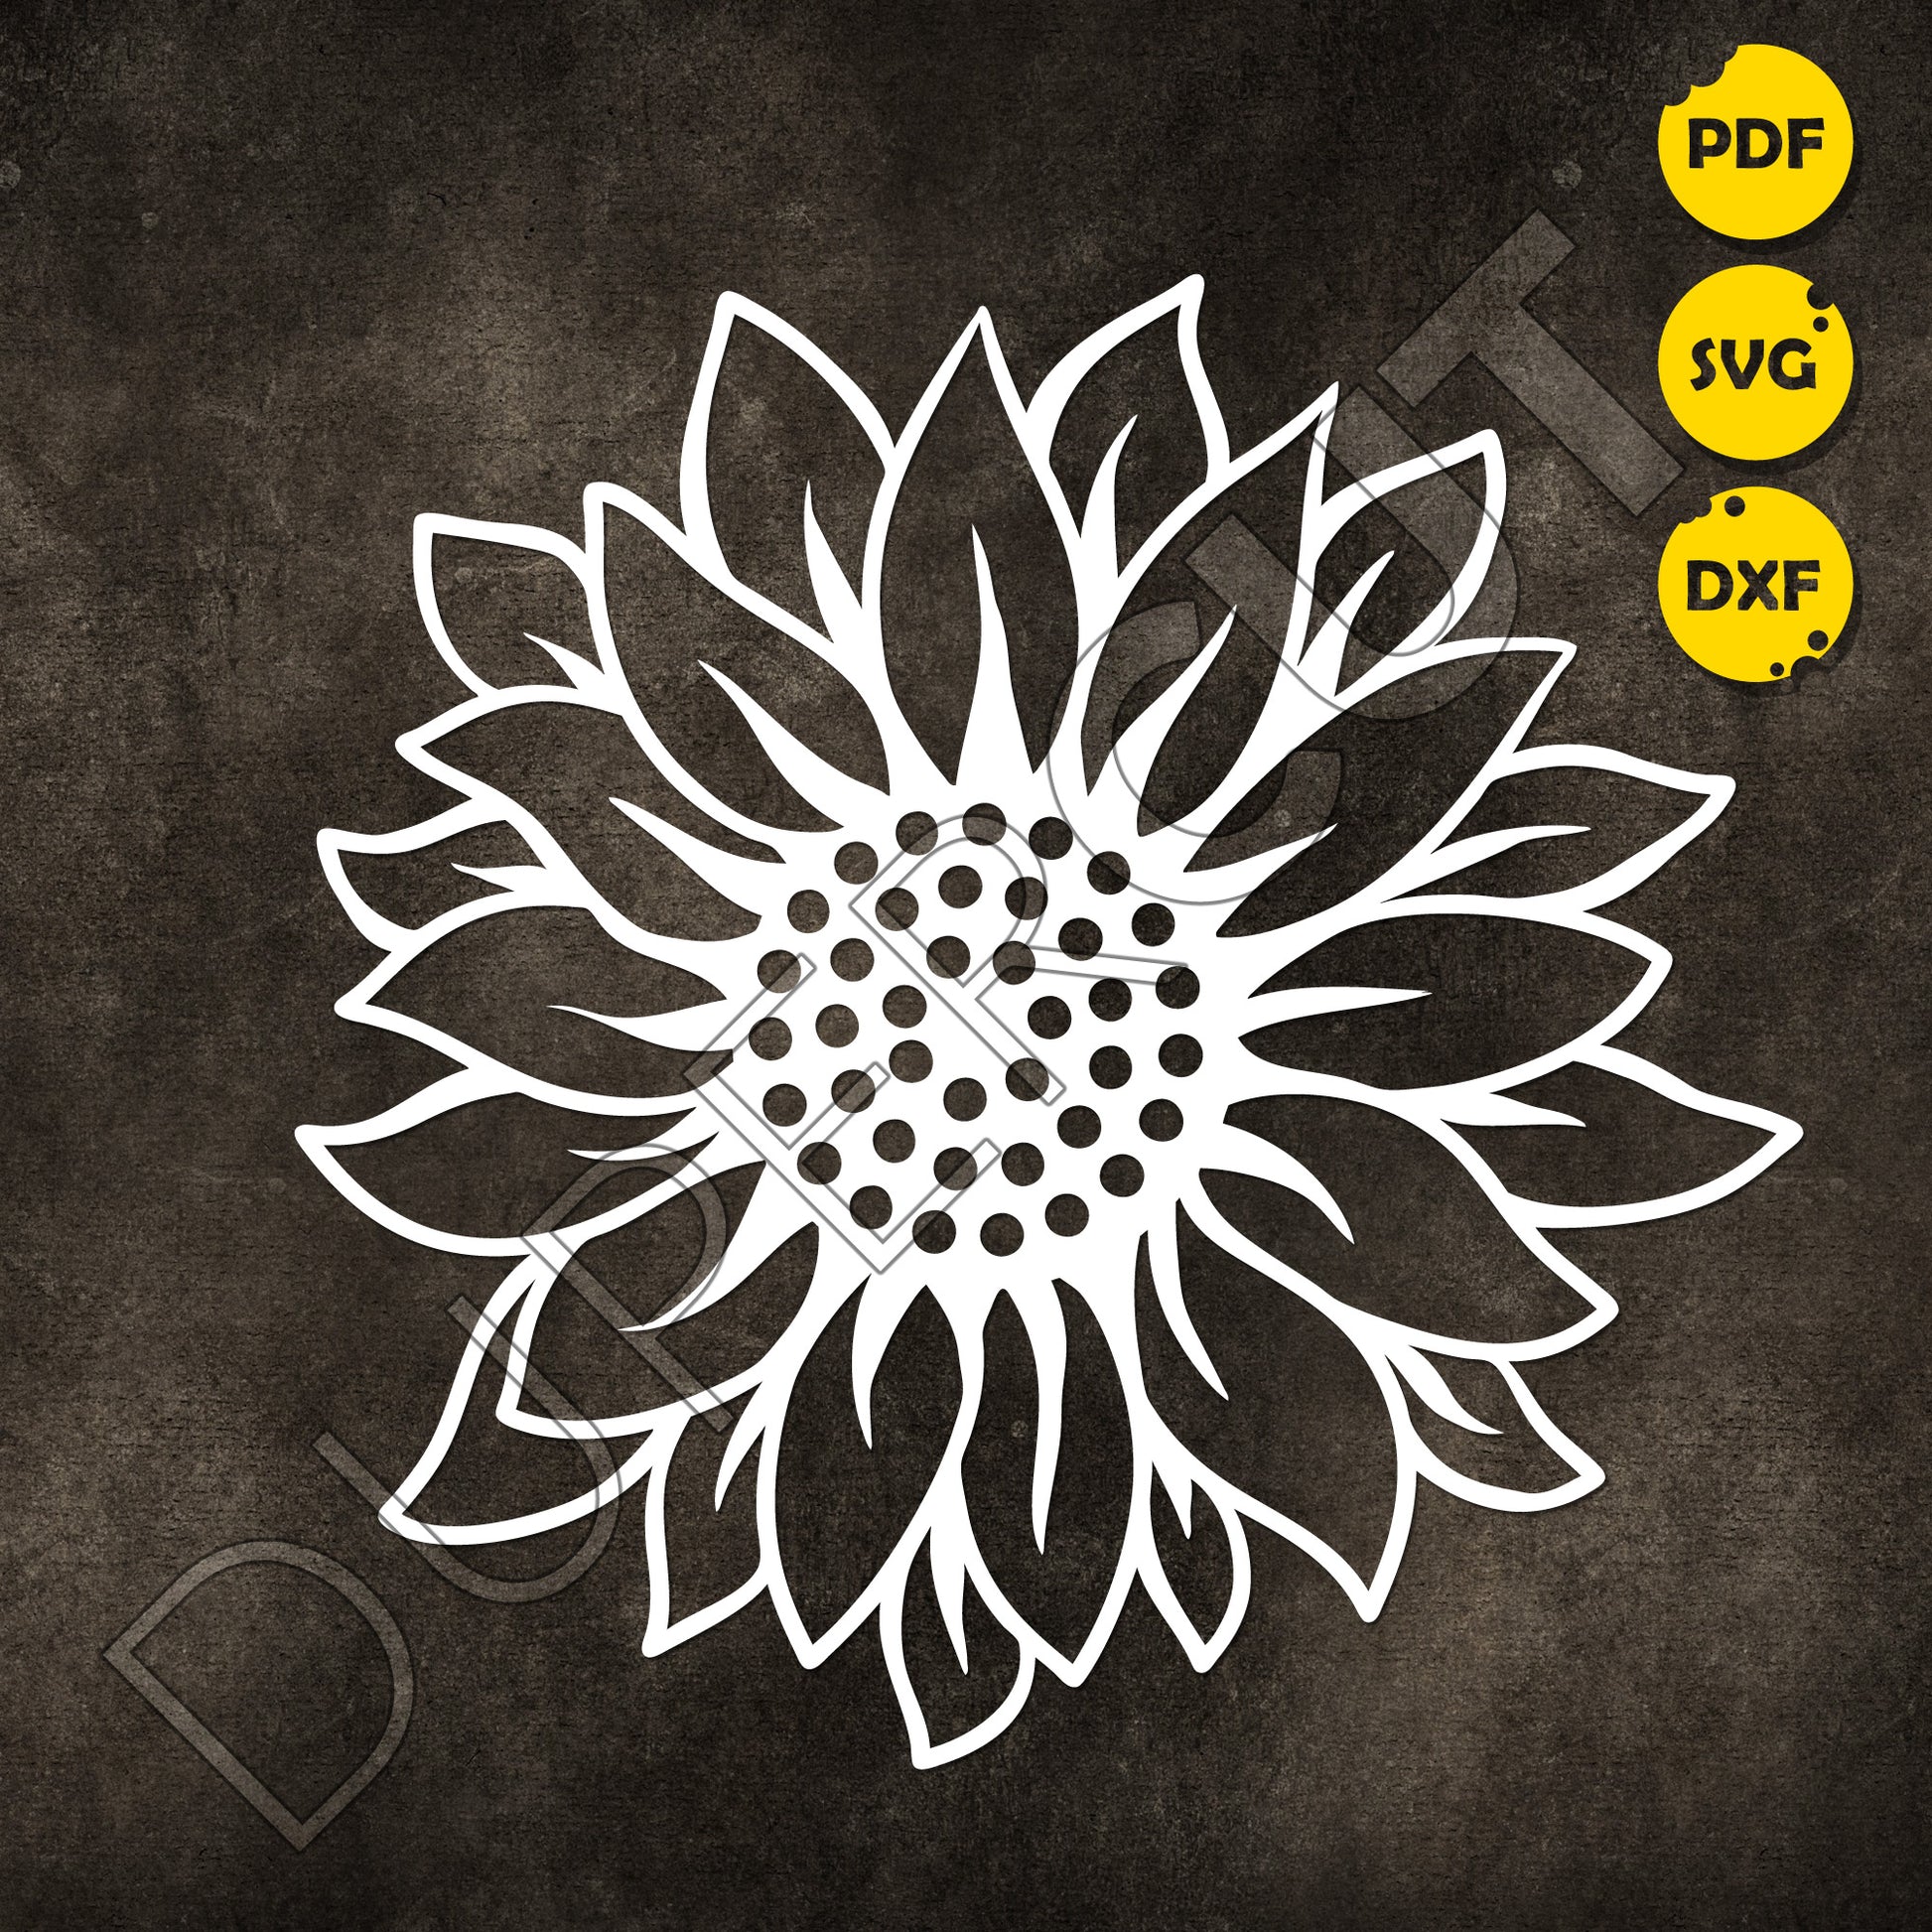 Sunflower silhouette, easy DIY project for beginners, cutting  template - SVG DXF PNG files for Cricut, Glowforge, Silhouette Cameo, CNC Machines